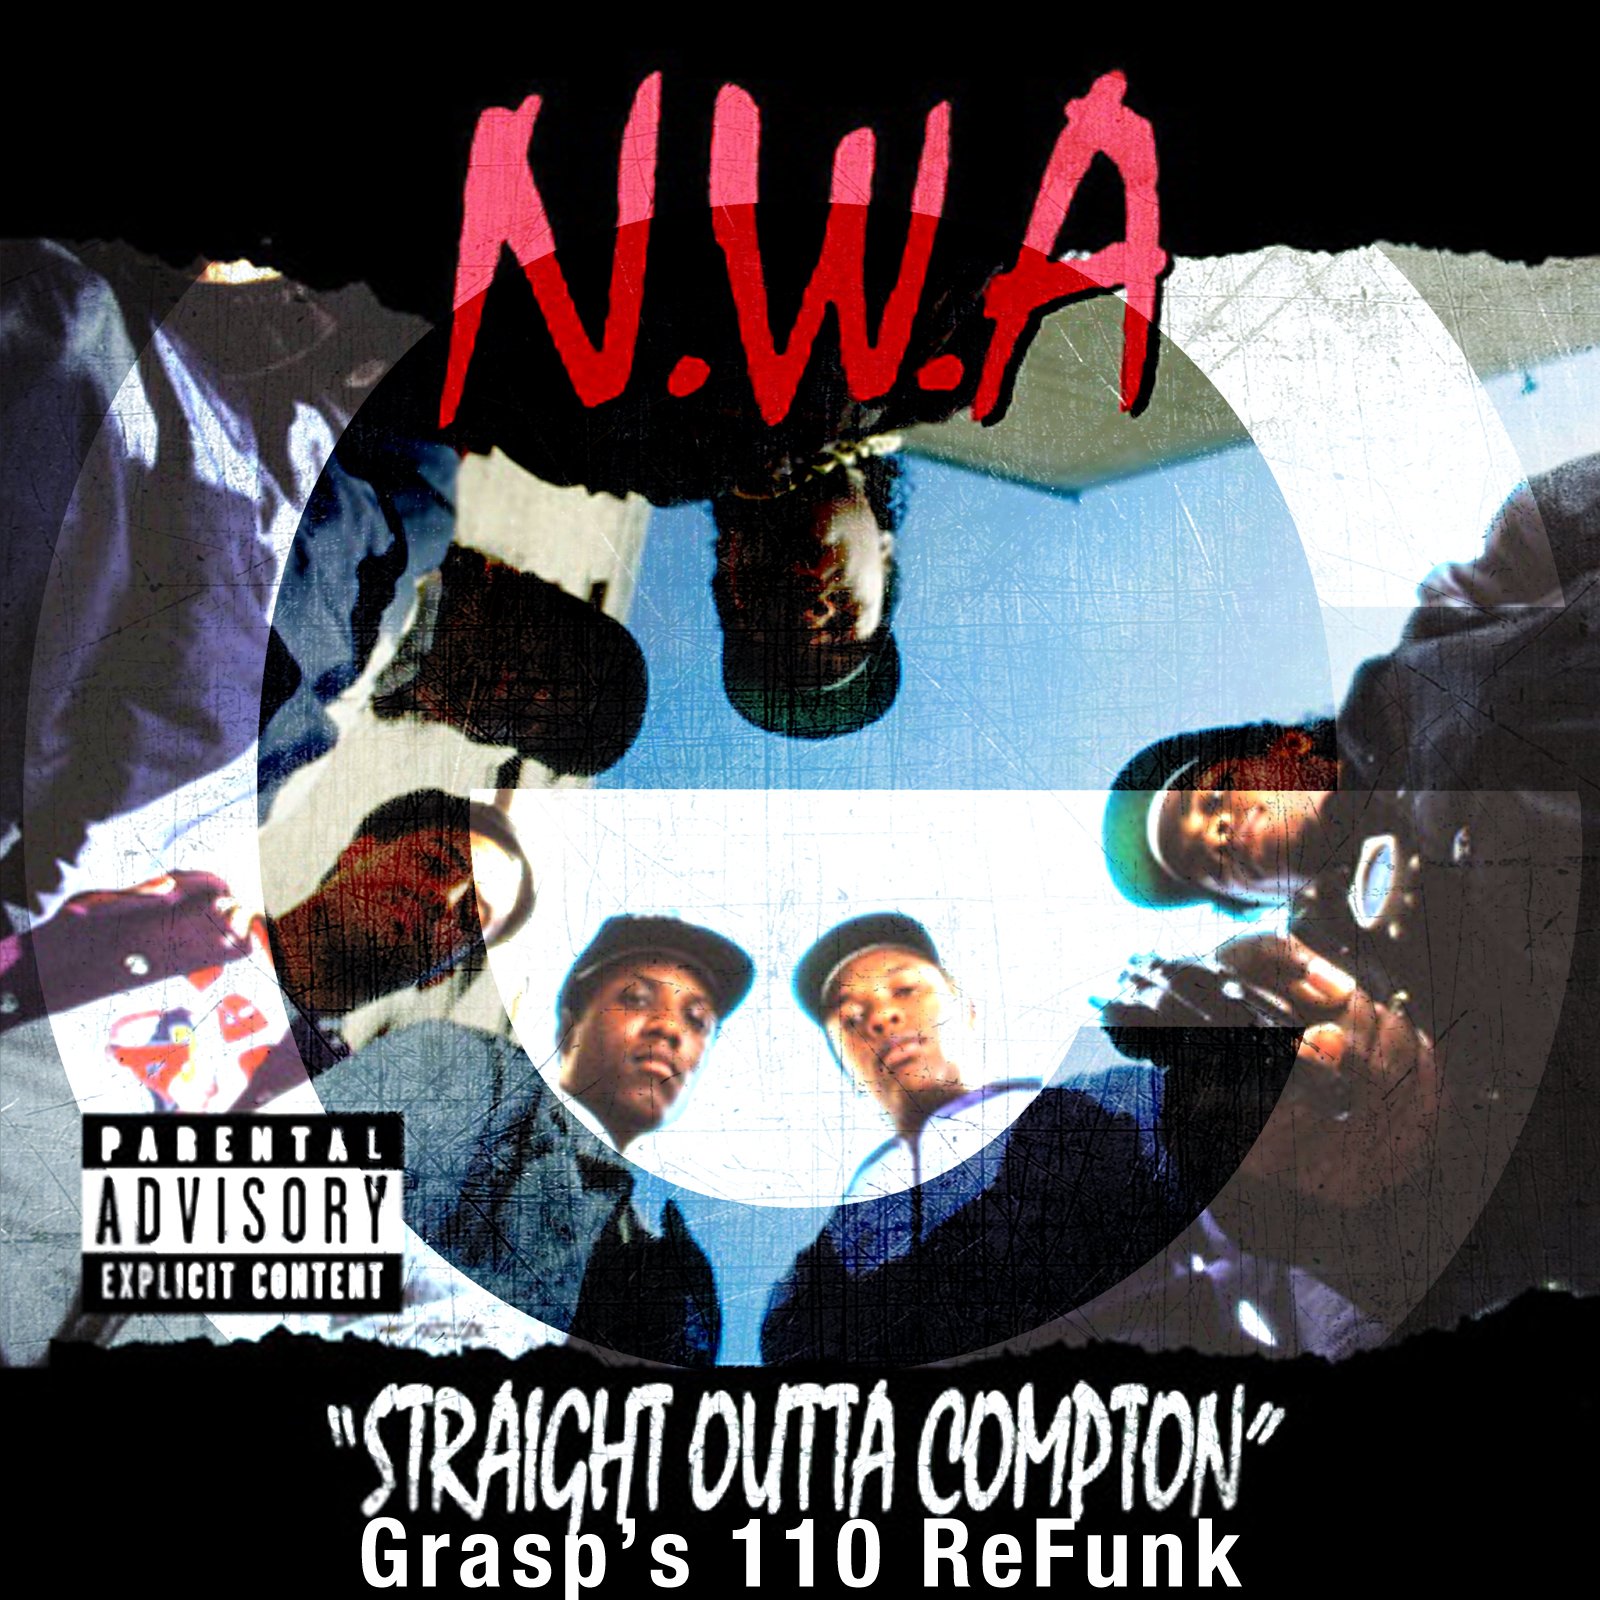 where can i watch straight outta compton online free